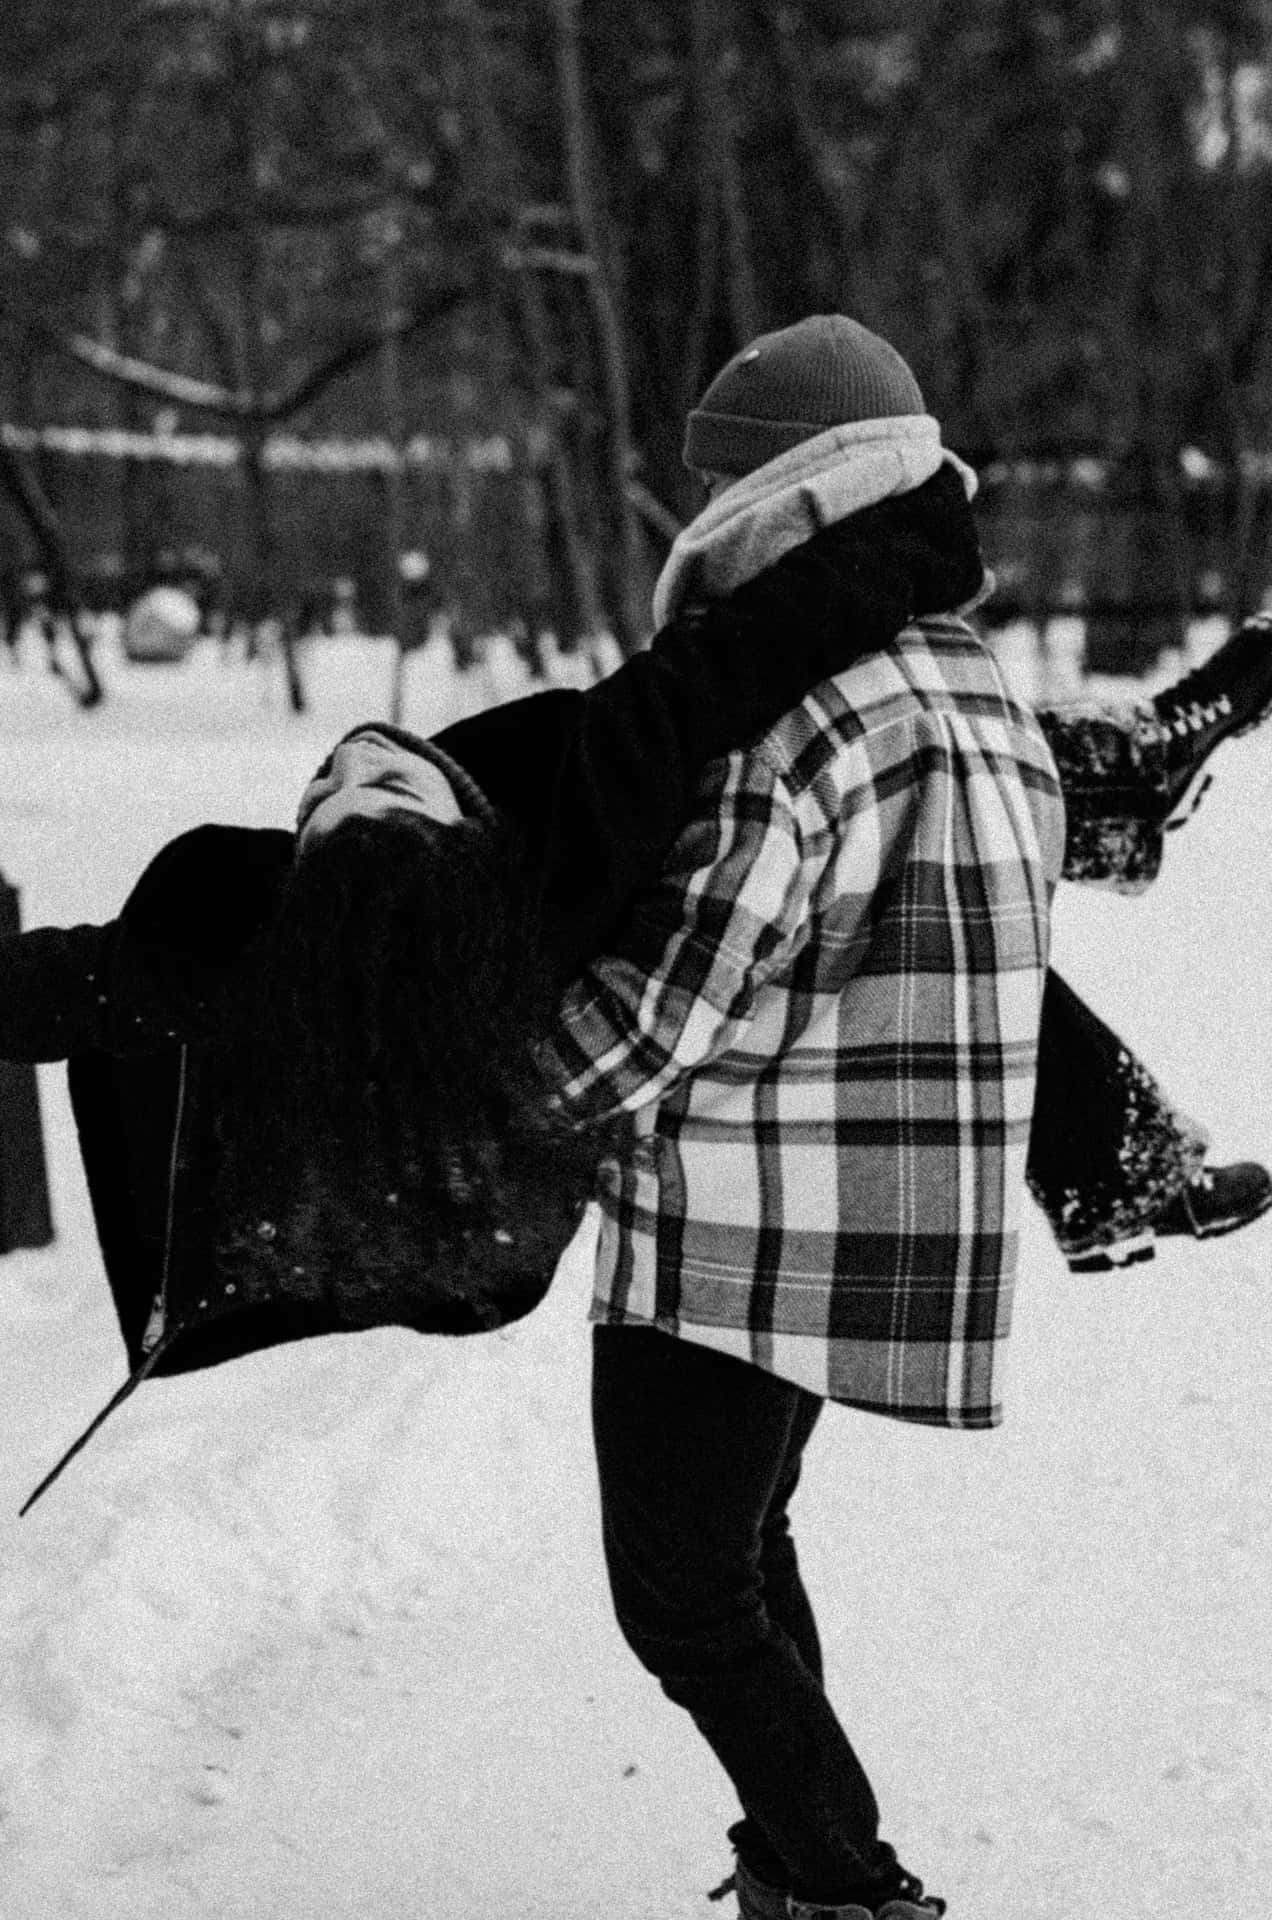 Cute Relationship Black And White Snow Picture